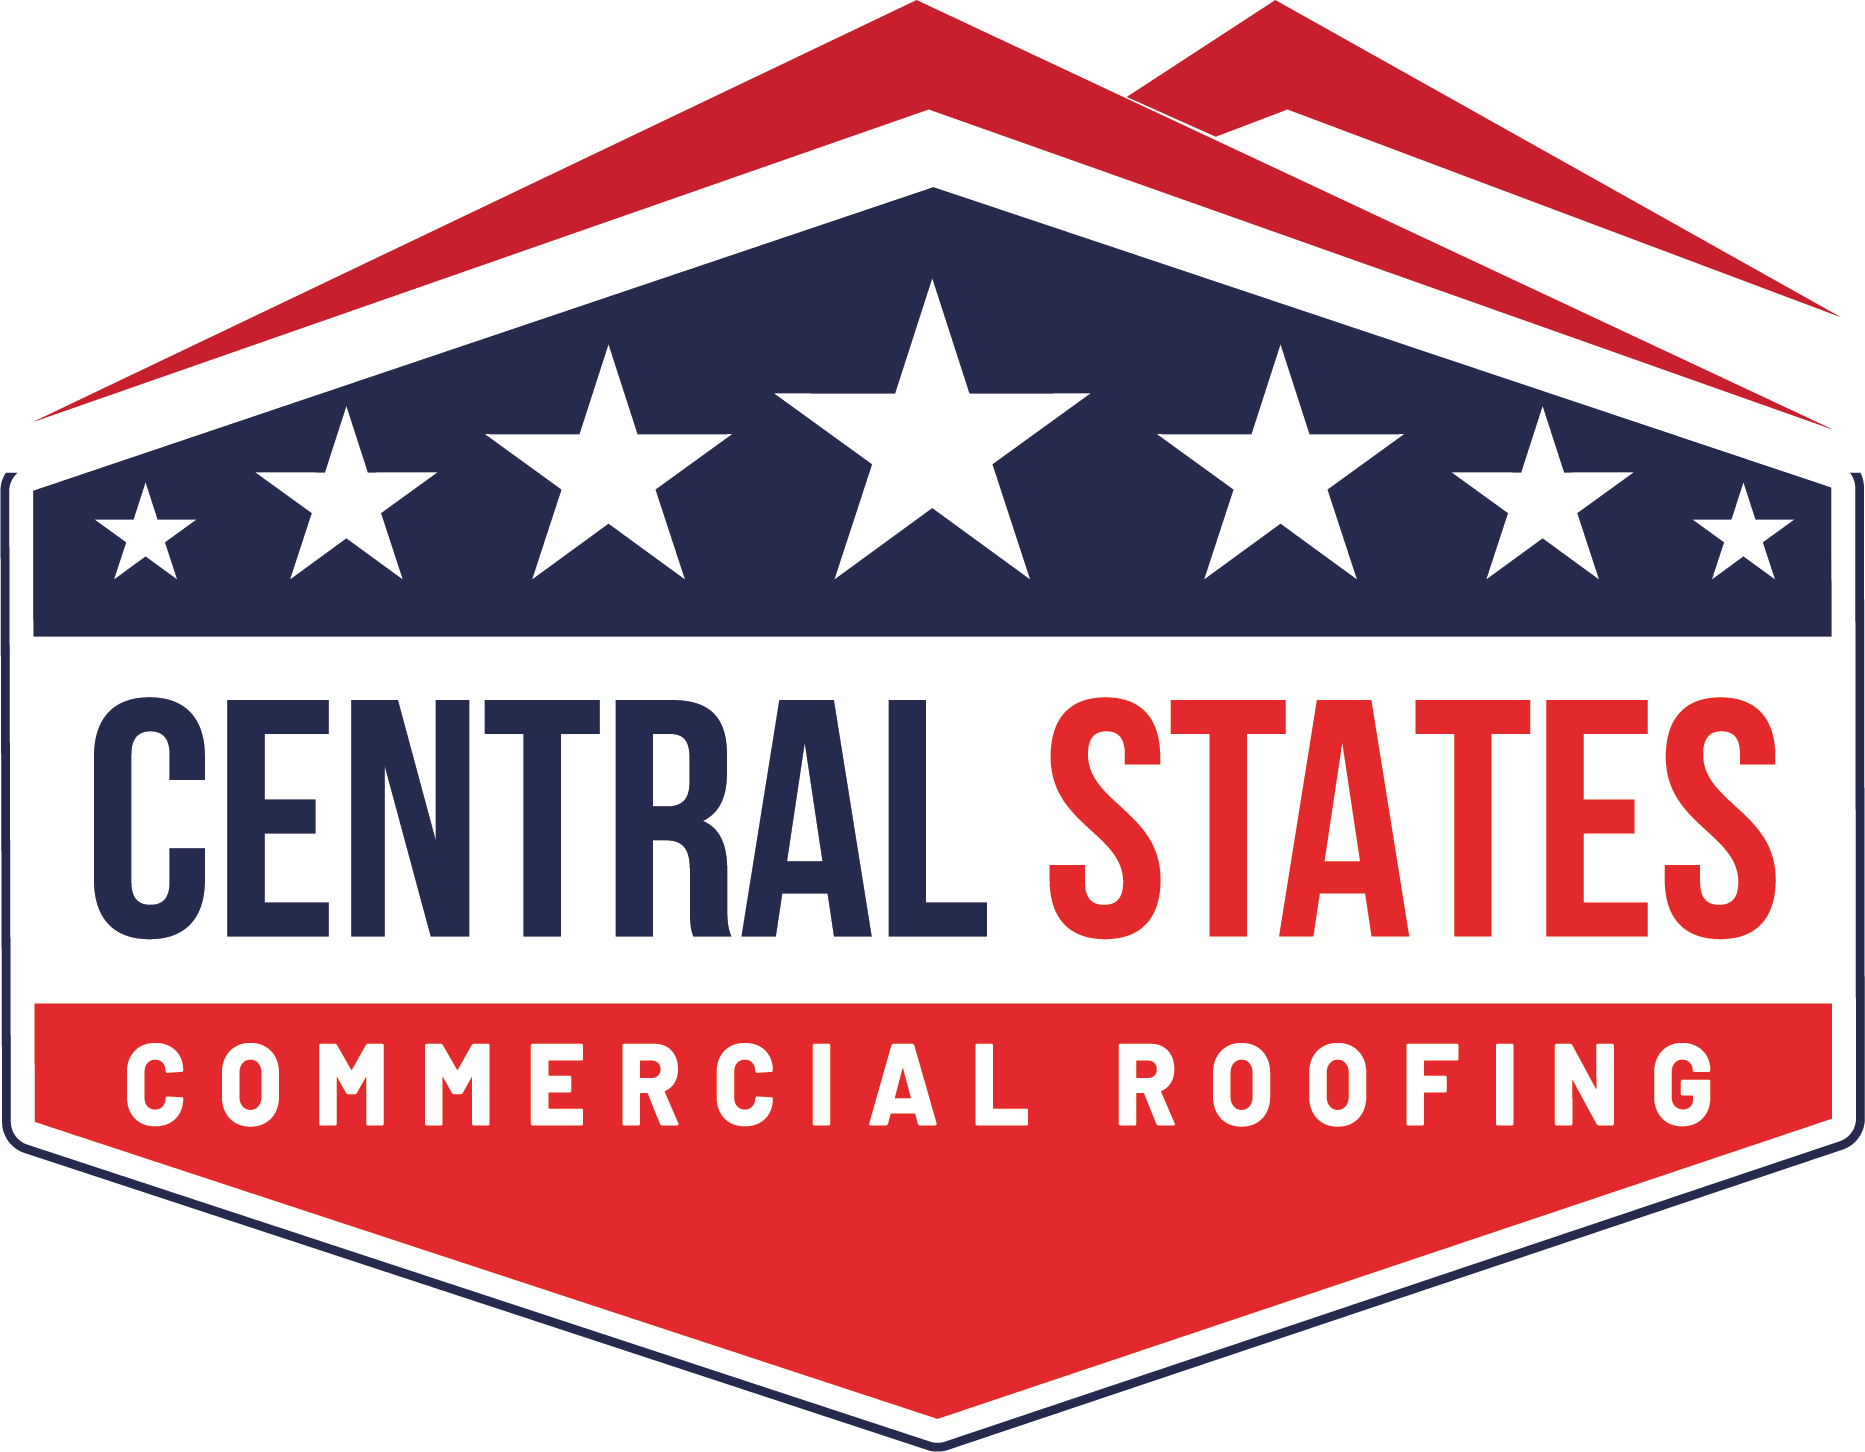 Central States Commercial Roofing - Trusted Local Roofers